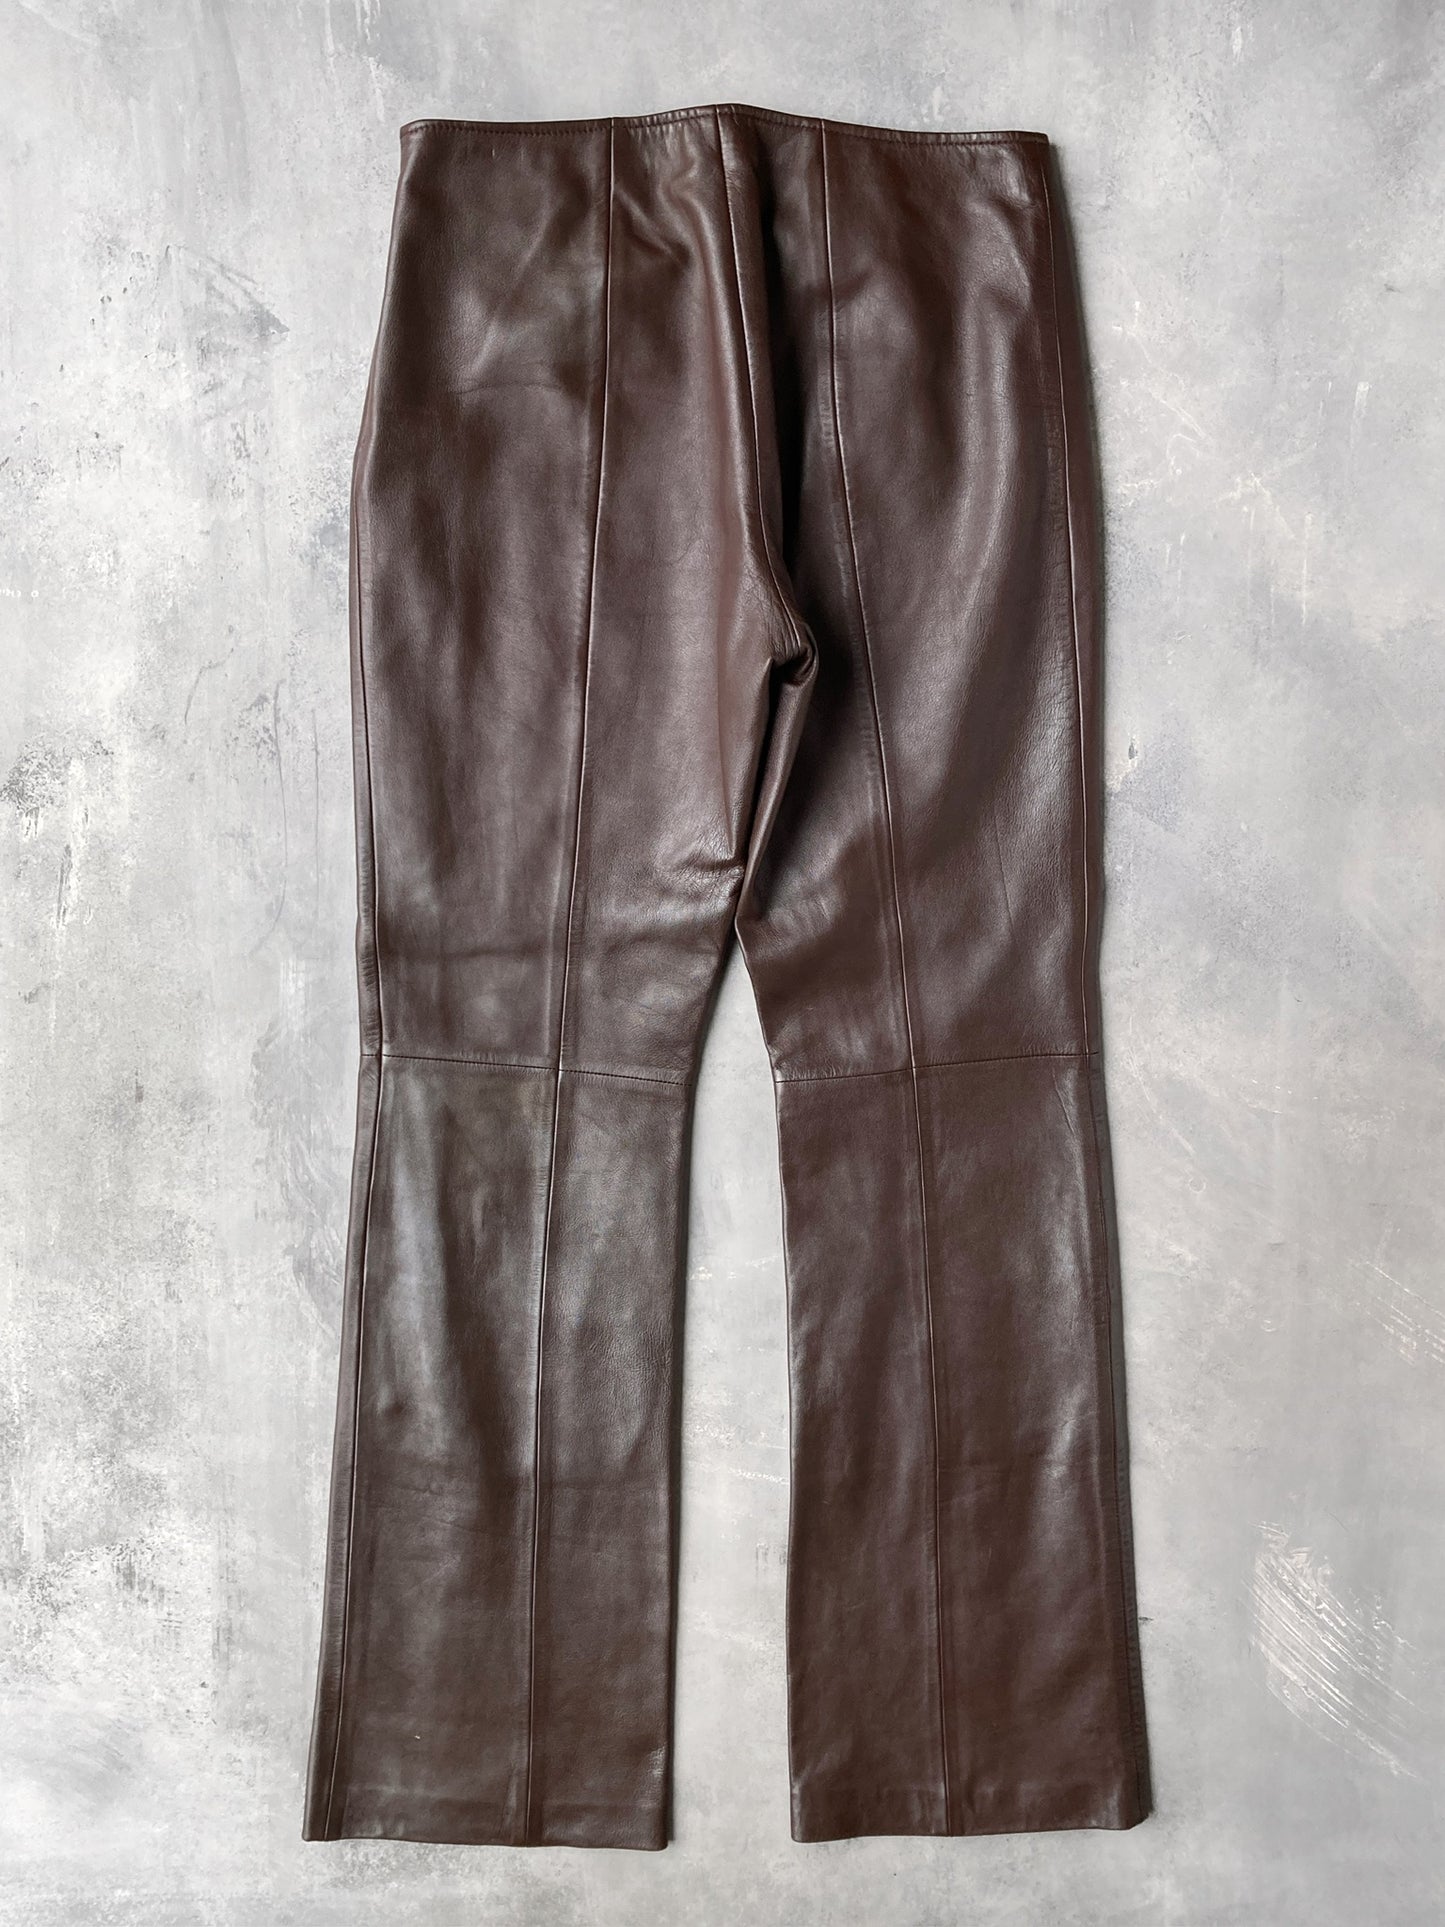 Brown Leather Pants 90's - 4